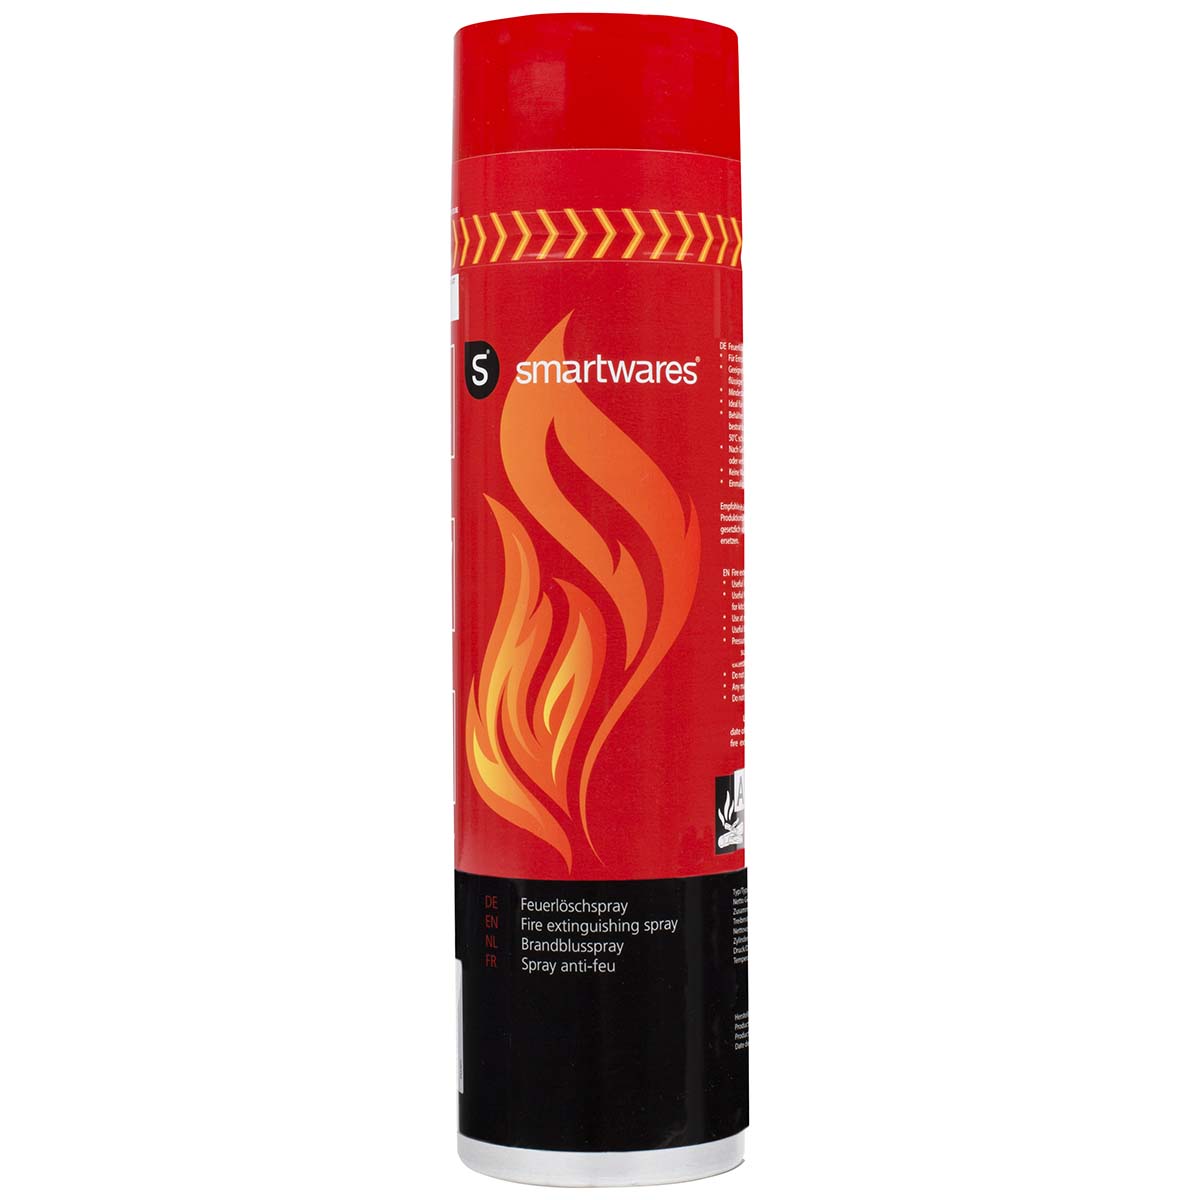 5303368 This fire extinguisher has a 600 ml capacity and is suitable for fire classes 5A, 21B and 5F. The extinguishing spray has a strong extinguishing capacity and is very easy to use. The spray is ideal for use in the kitchen because of its fat-extinguishing ability.